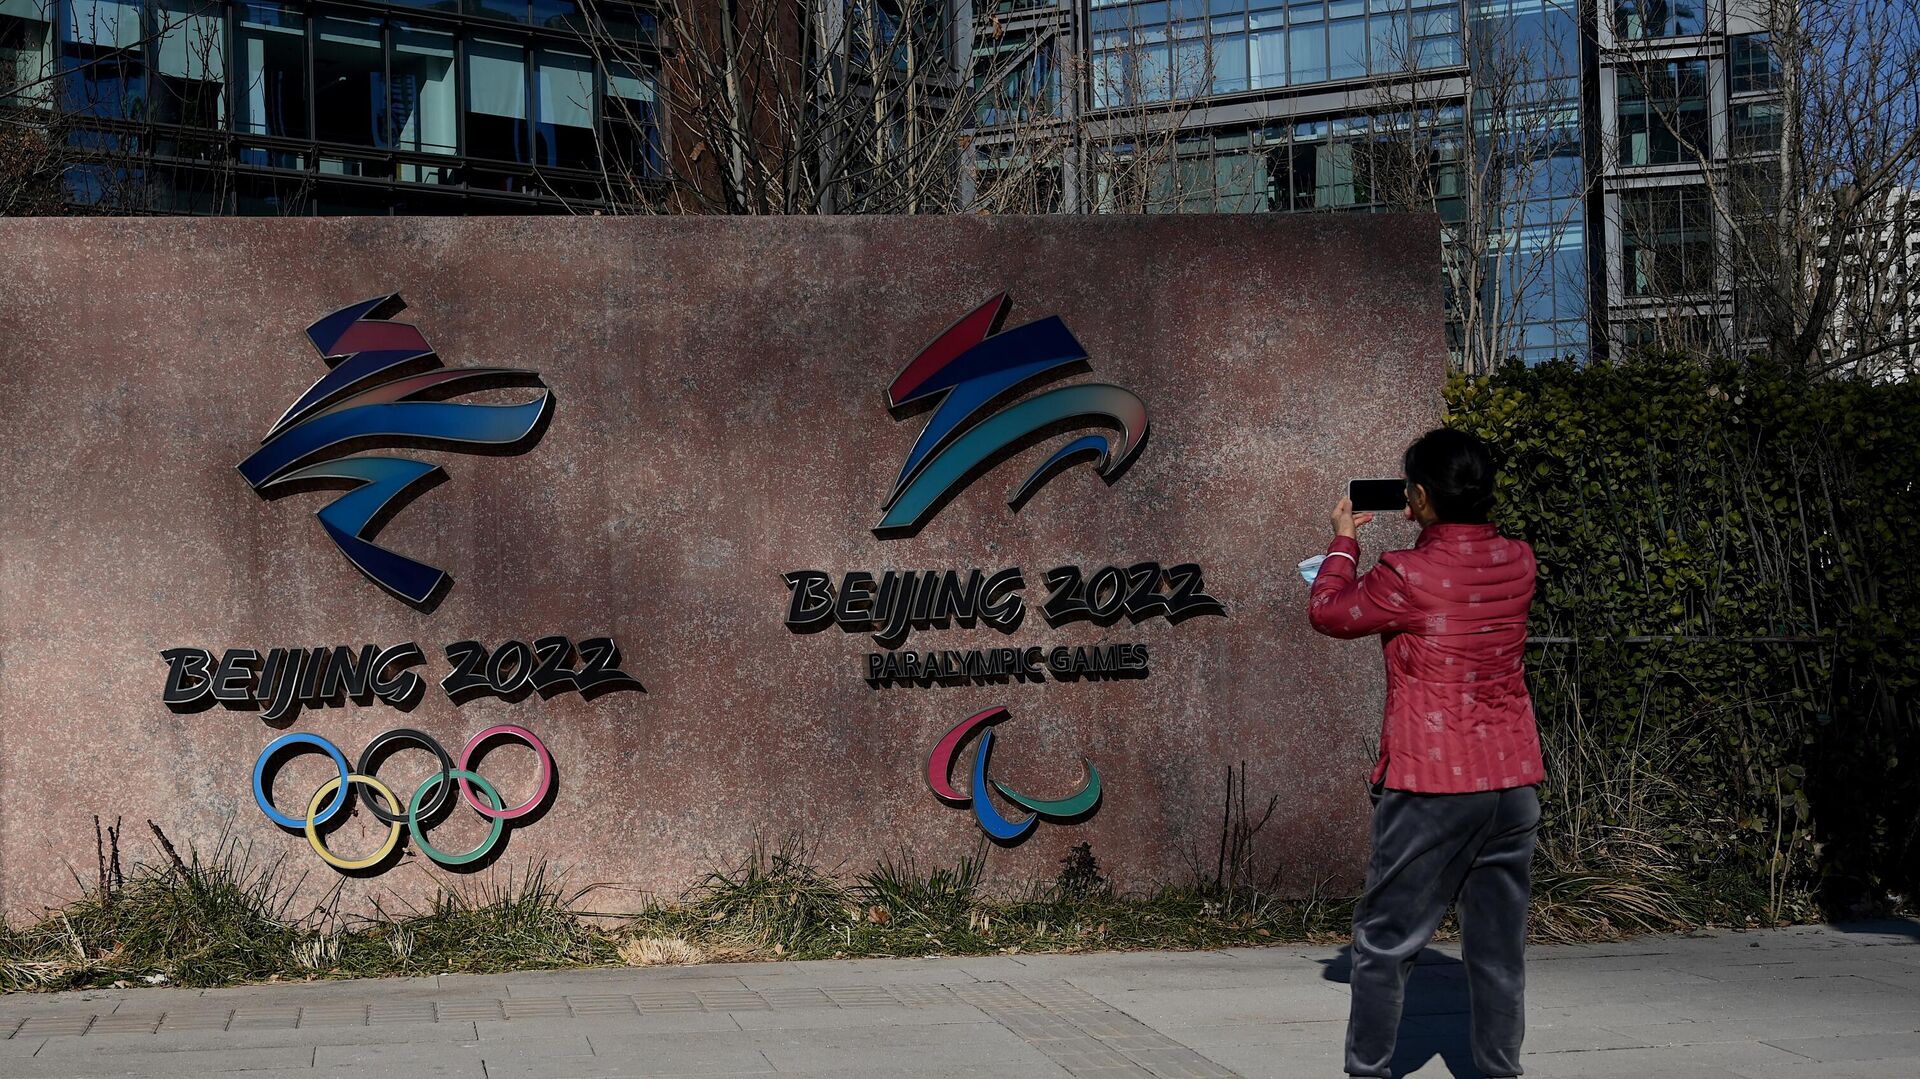 A woman takes a photo of the logos of Beijing 2022 Winter Olympics and Paralympic Winter Games in Shougang Park, one of the sites for the Olympics, in Beijing on December 7, 2021. (Photo by Noel Celis / AFP) - РИА Новости, 1920, 14.01.2022